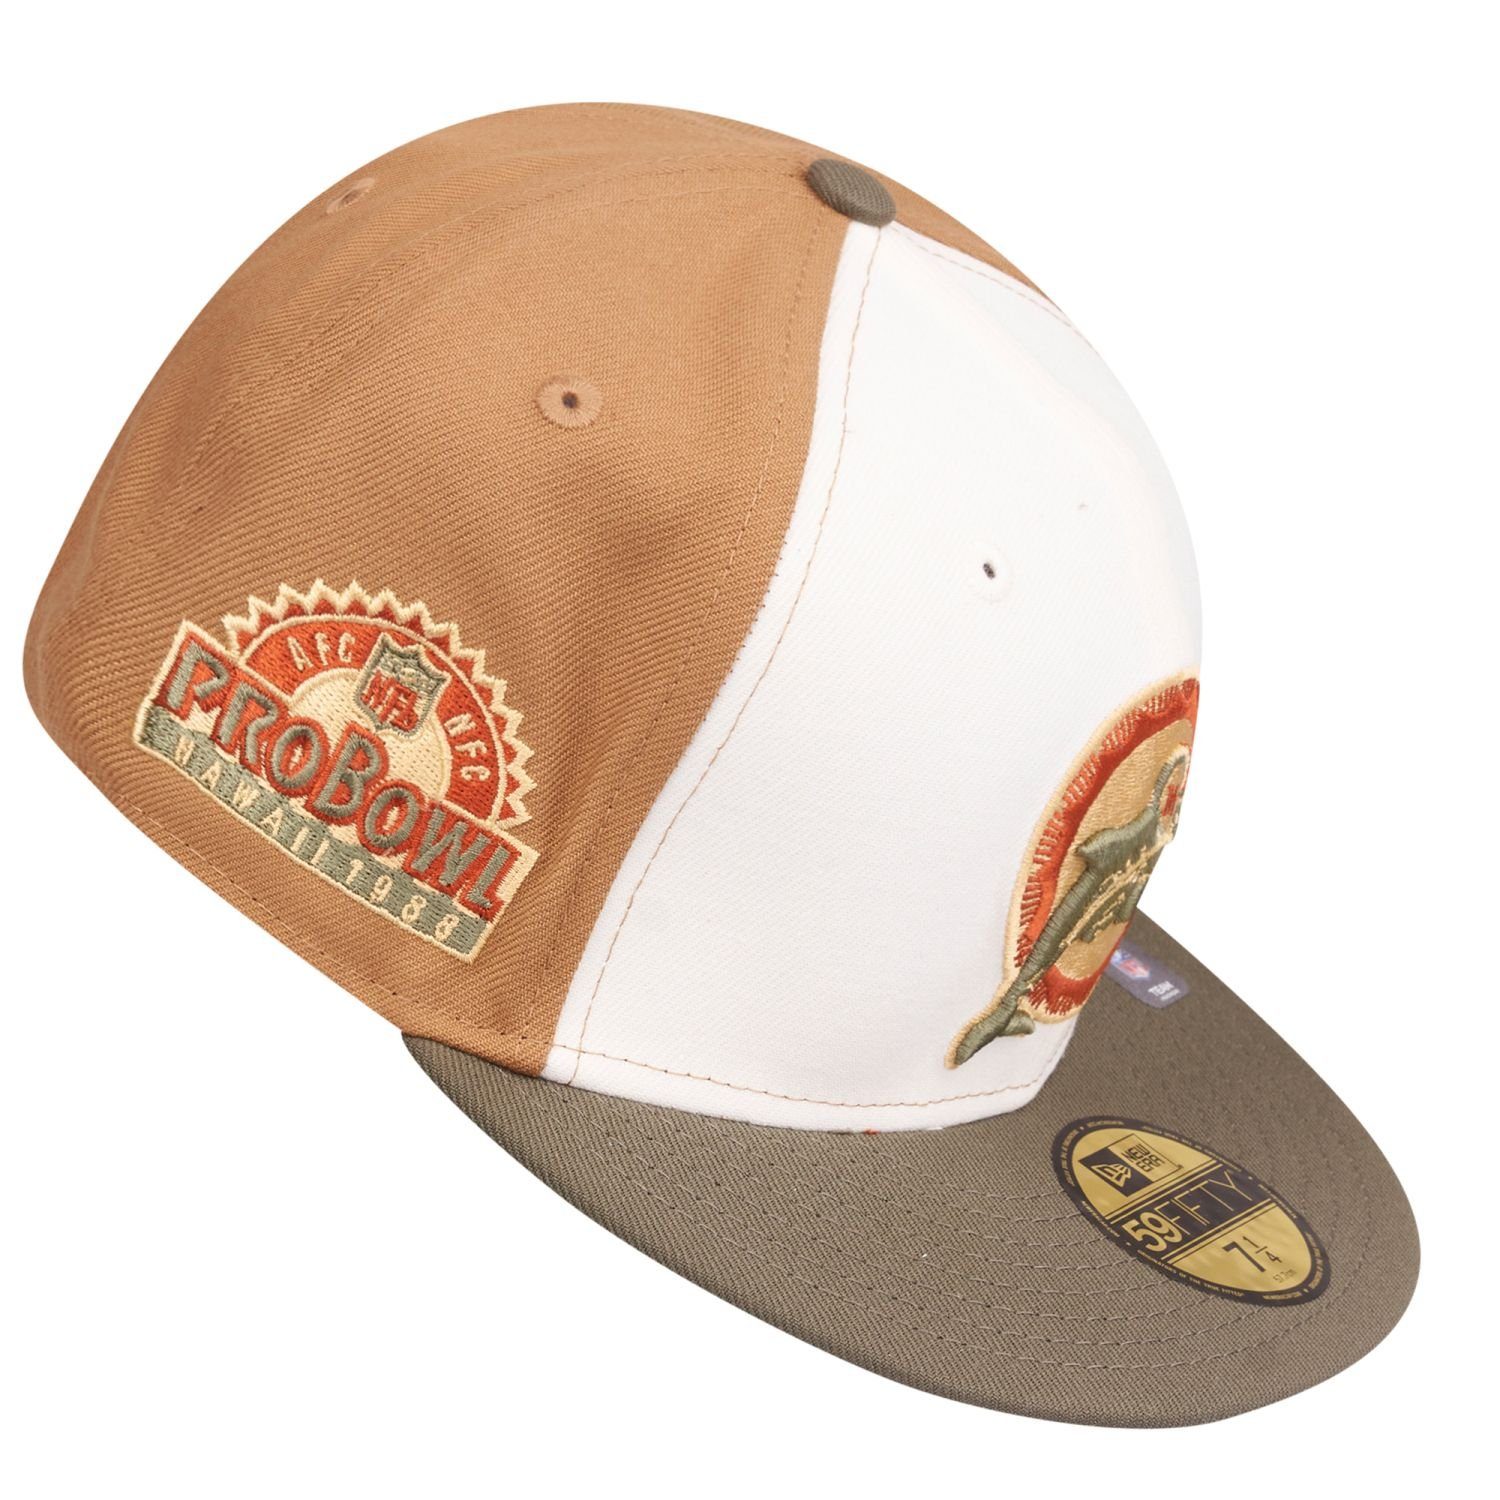 New Era 59Fifty Dolphins Throwback Fitted Miami Cap